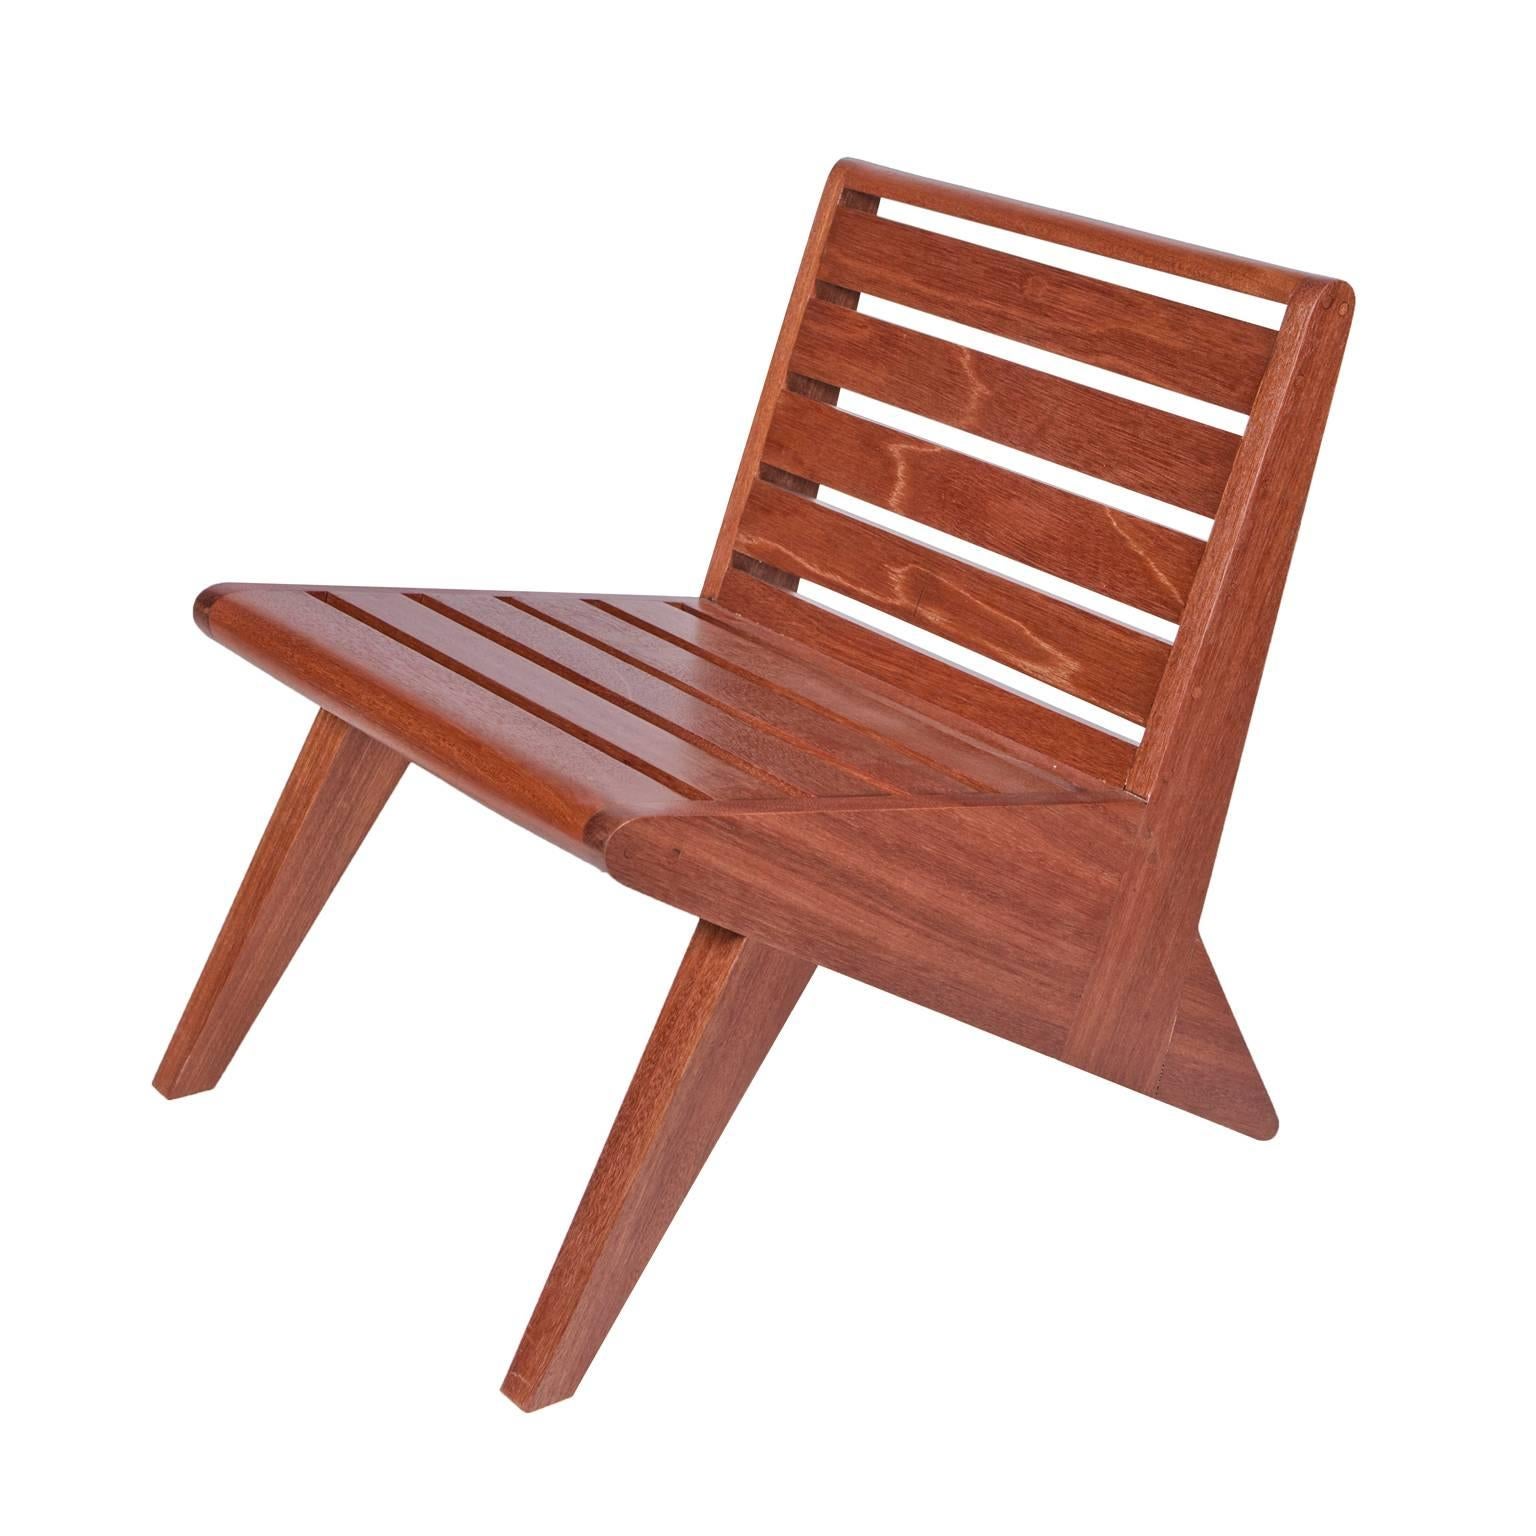 Arrowhead lounge chair by Michael Boyd for PLANEfurniture. Offered here in mahogany, with a small cowhide cushion. From the wedge series. 

The wedge series has a softer, more traditional character and may see wider distribution as a result.